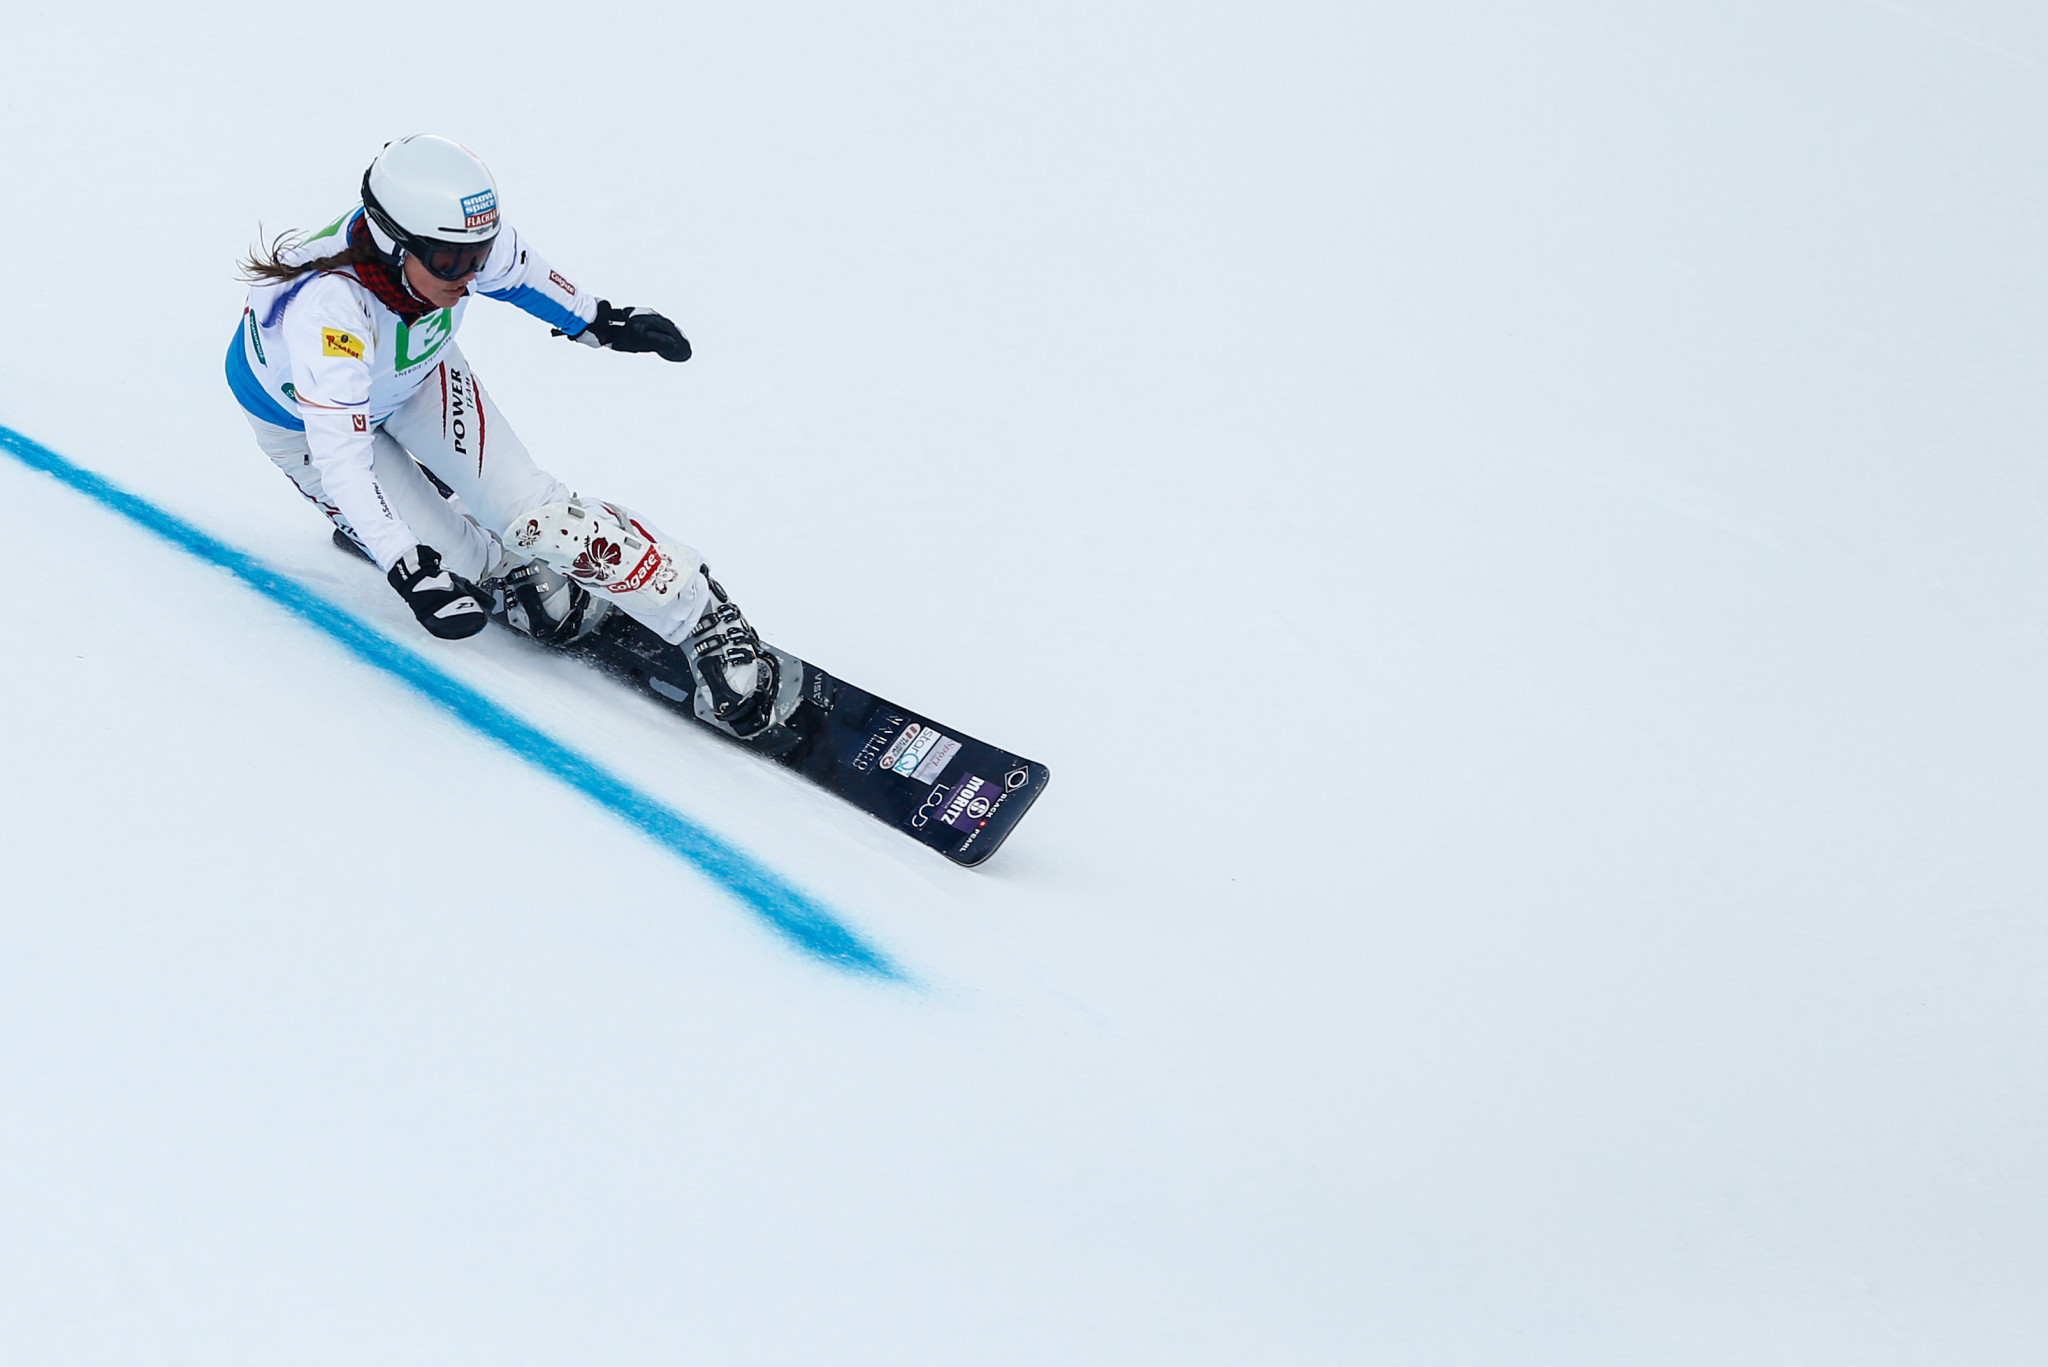 Austria's Claudia Riegler, who this month became the oldest winner of an FIS Snowboard World Cup event at 45-years-old, will compete in Moscow ©Getty Images